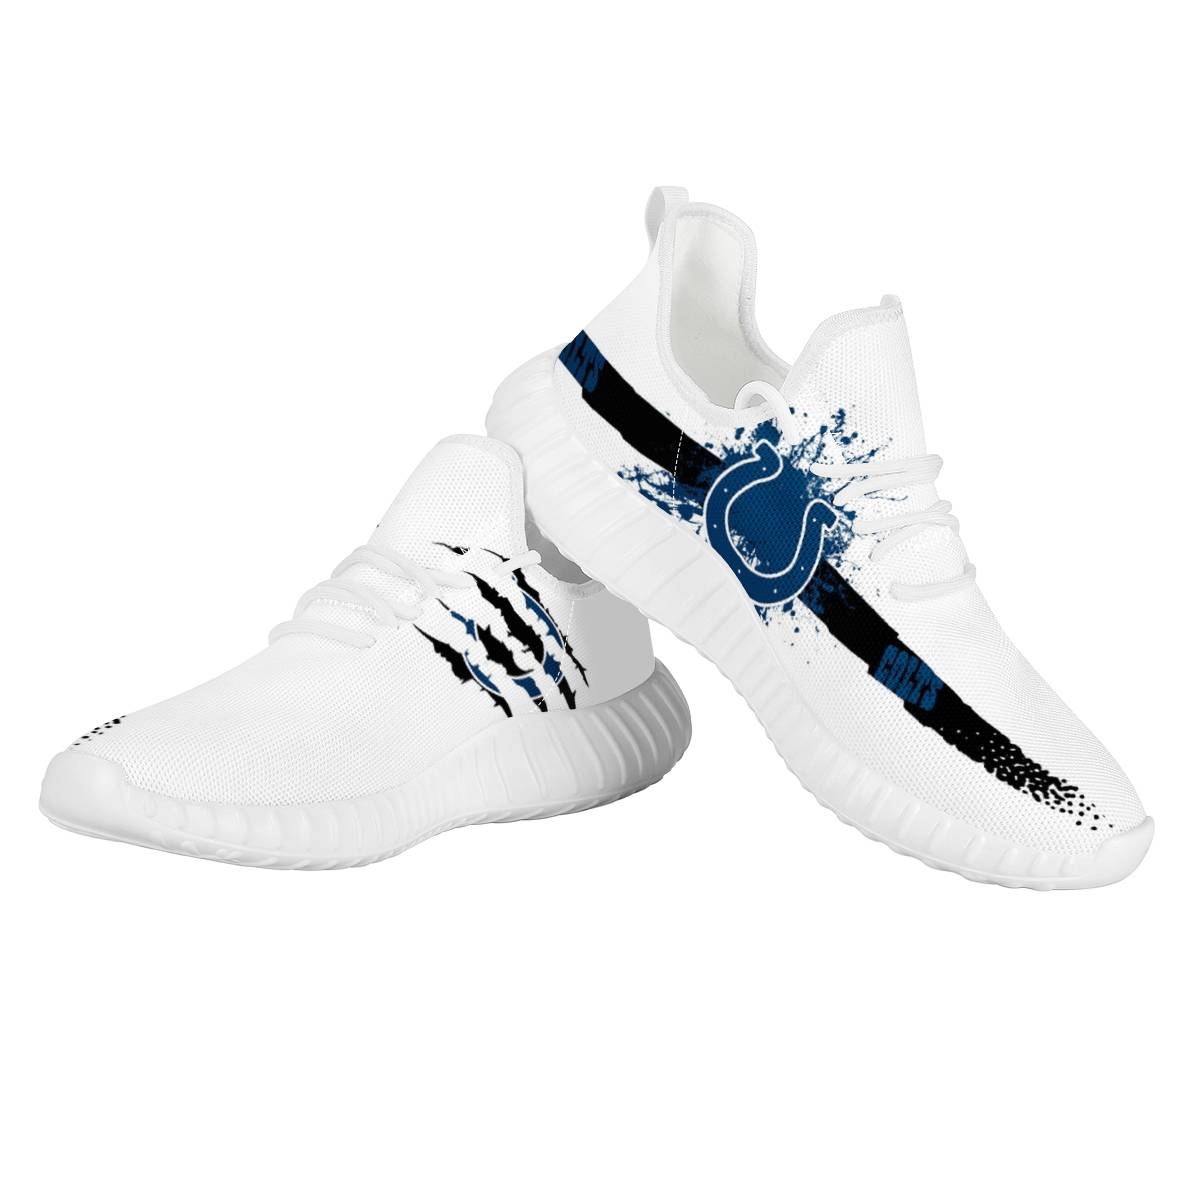 Women's Indianapolis Colts Mesh Knit Sneakers/Shoes 006